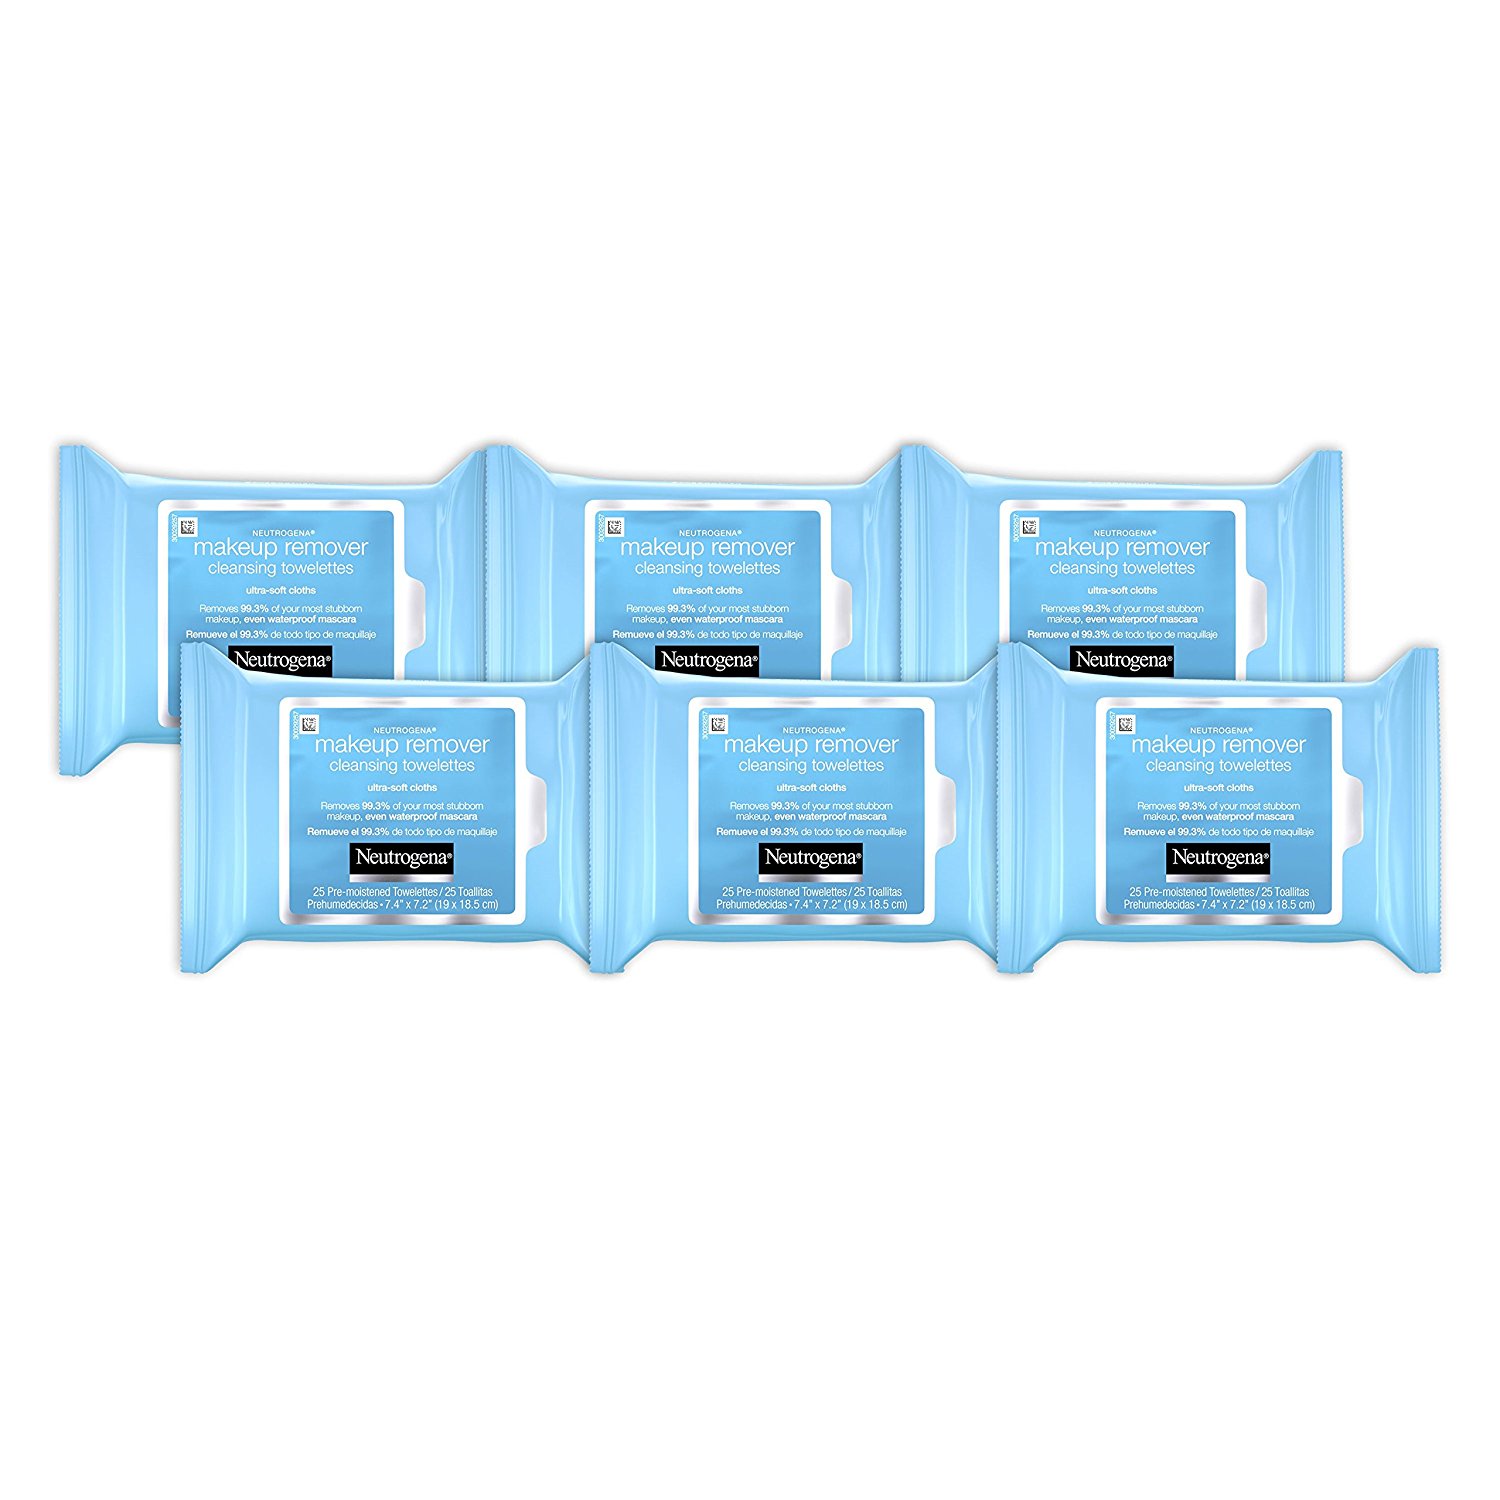 6-pack of Neutrogena makeup removing wipes for $15